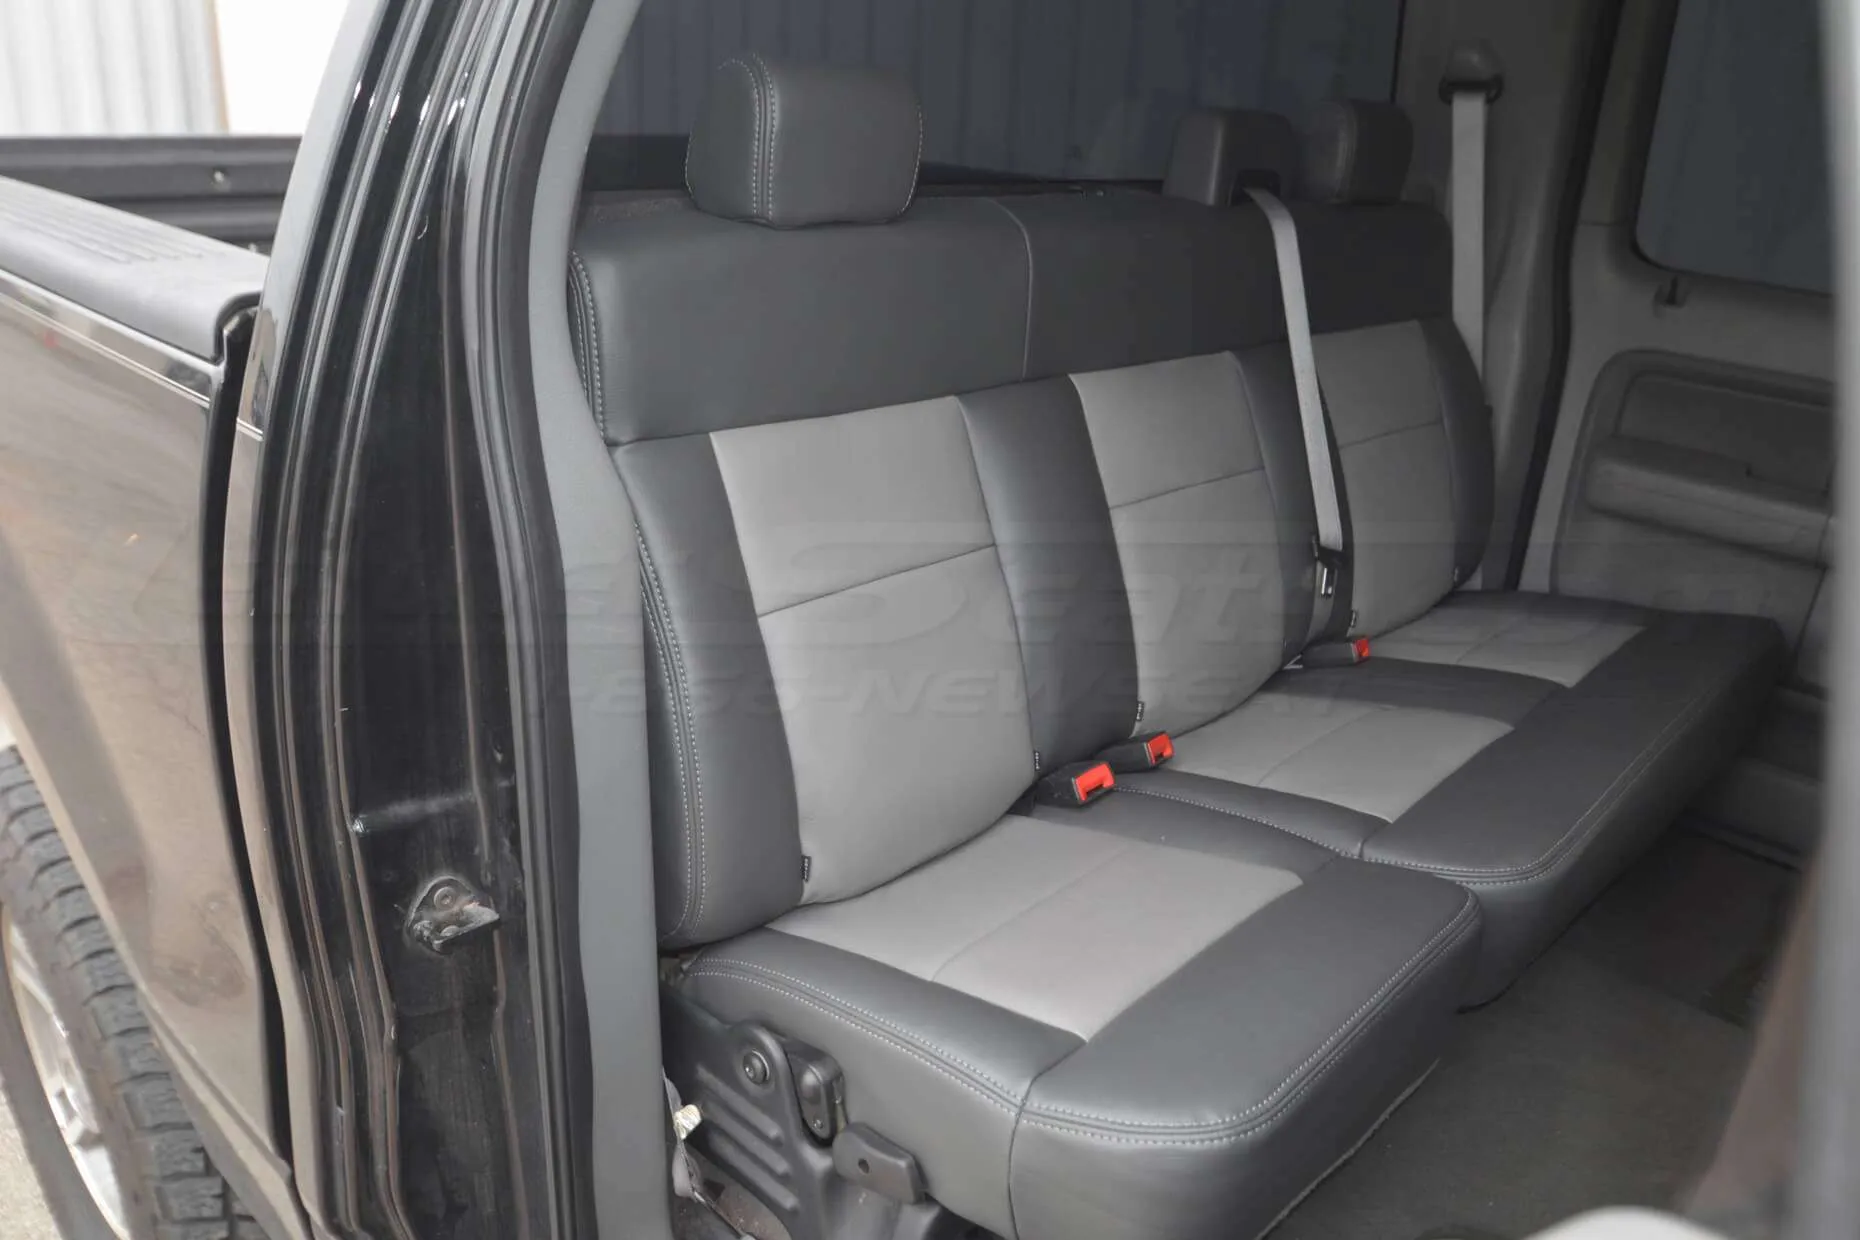 Ford F-150 installed leather kit - Graphite & Stone - Rear seats